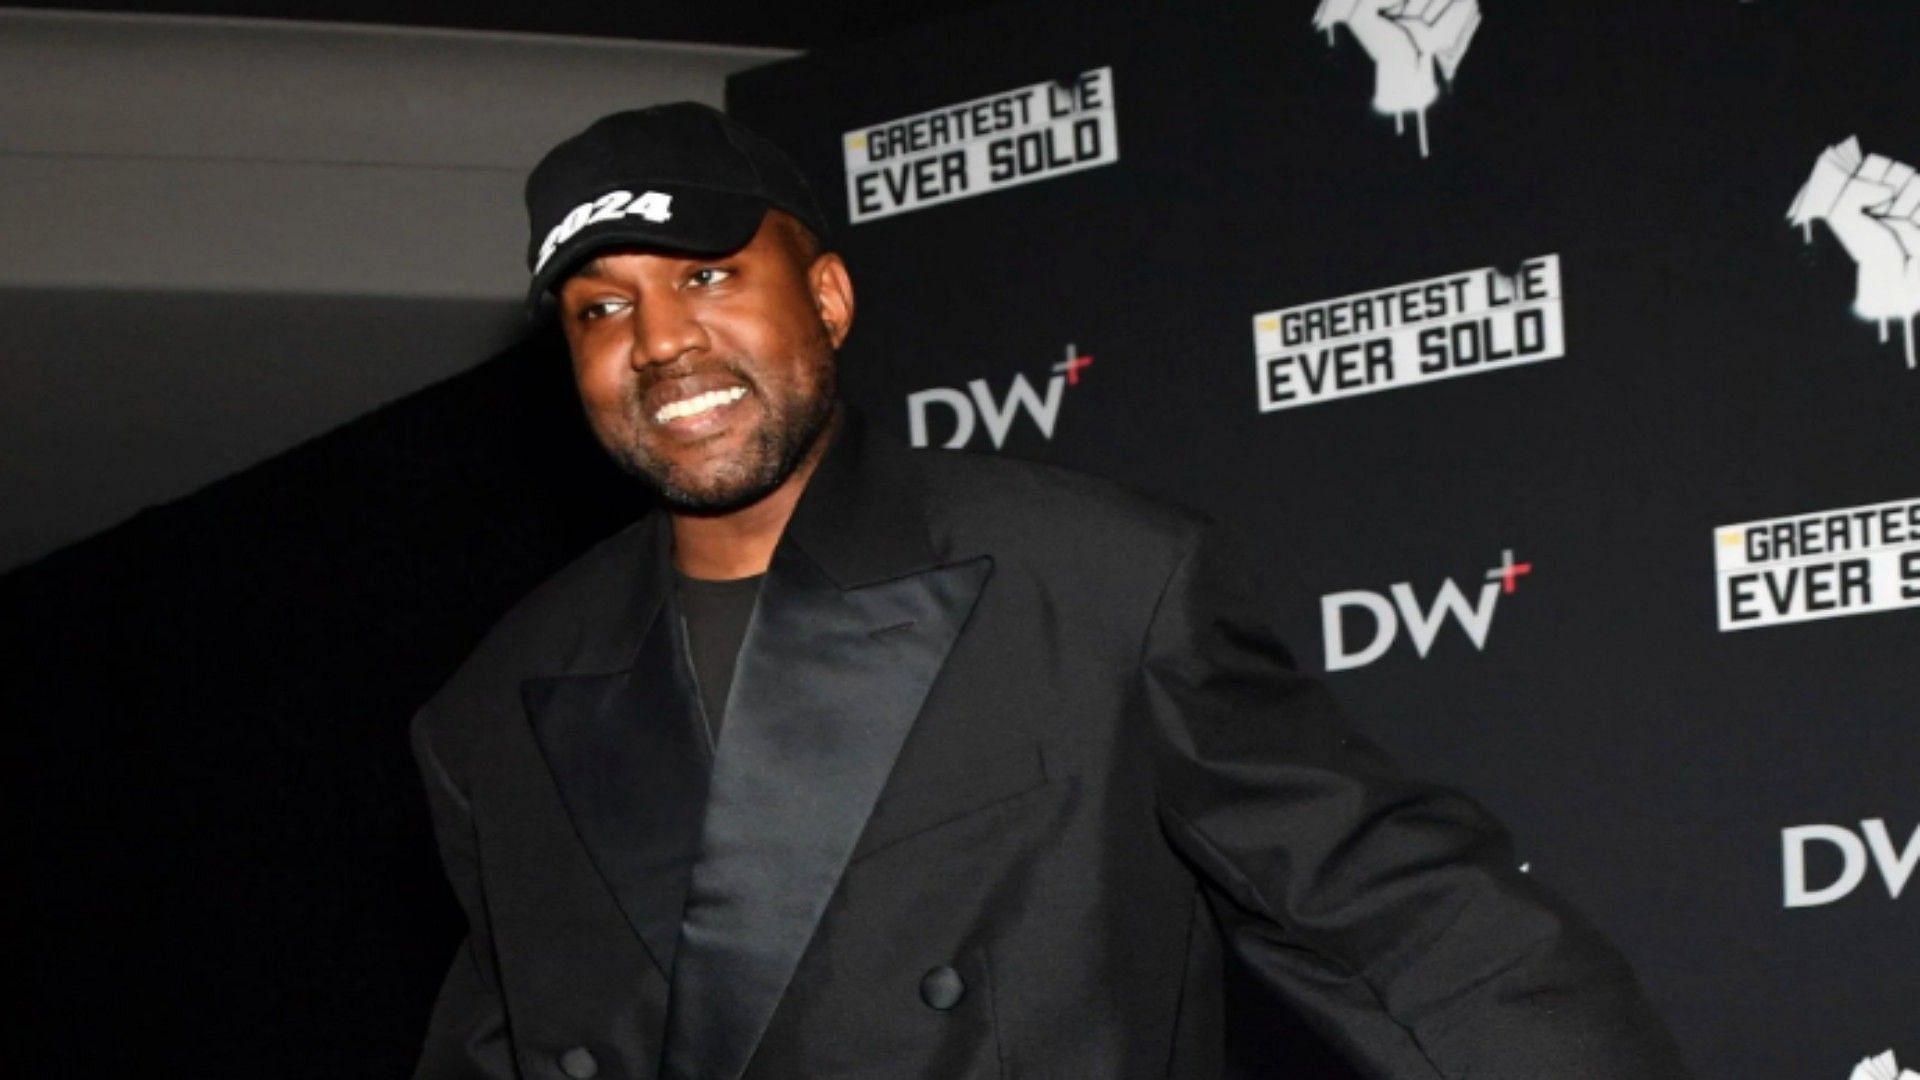 Kanye West at &quot;The Greatest Lie Ever Sold&quot; Premiere Screening 9Image via Getty)